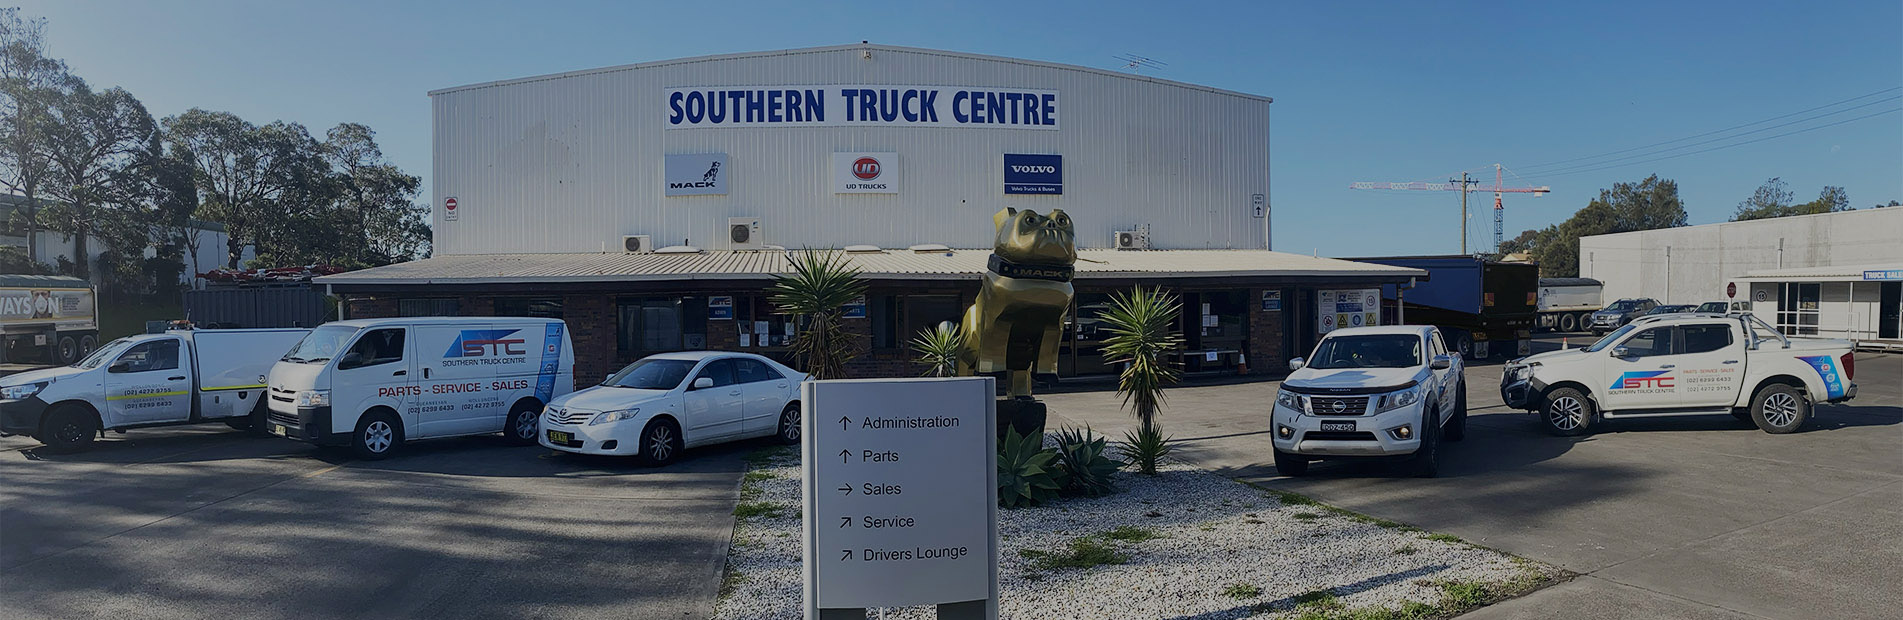 Southern Truck Centre